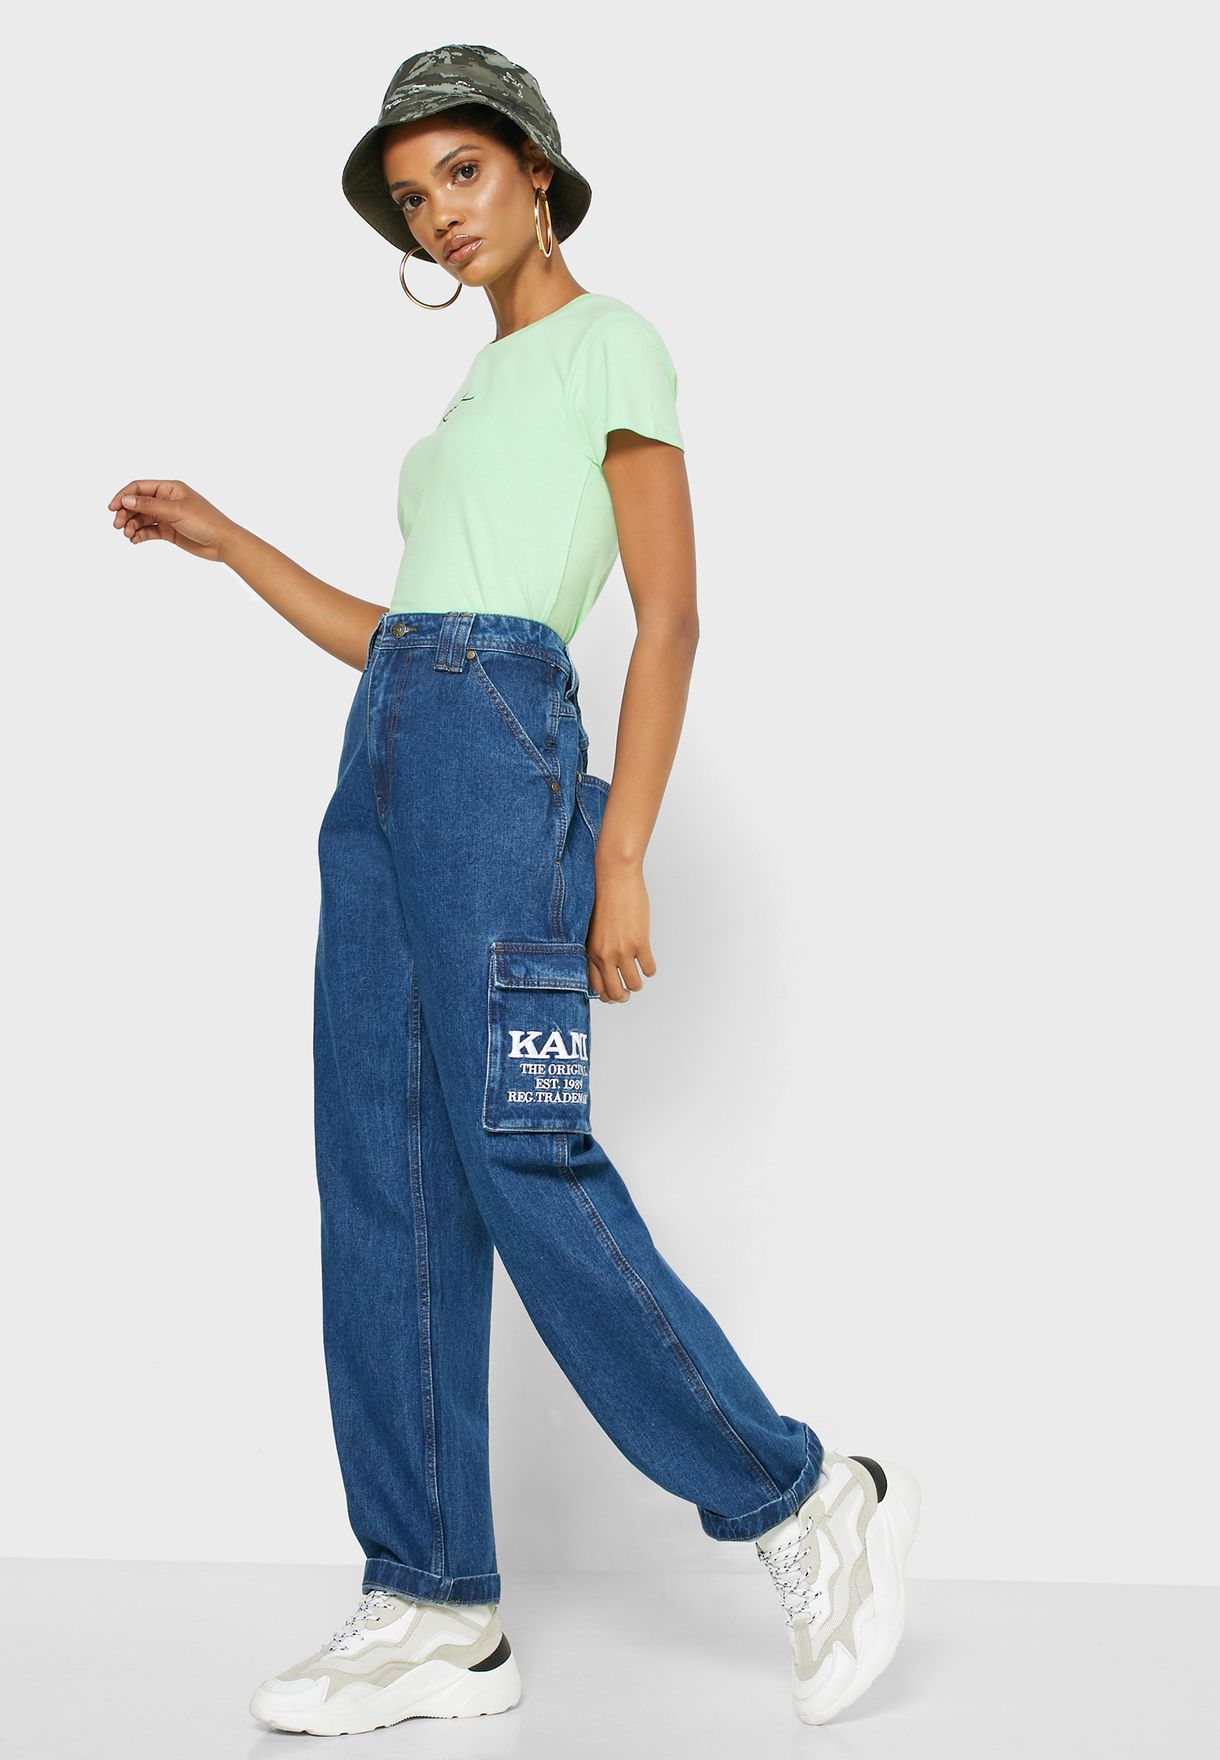 baggy female jeans